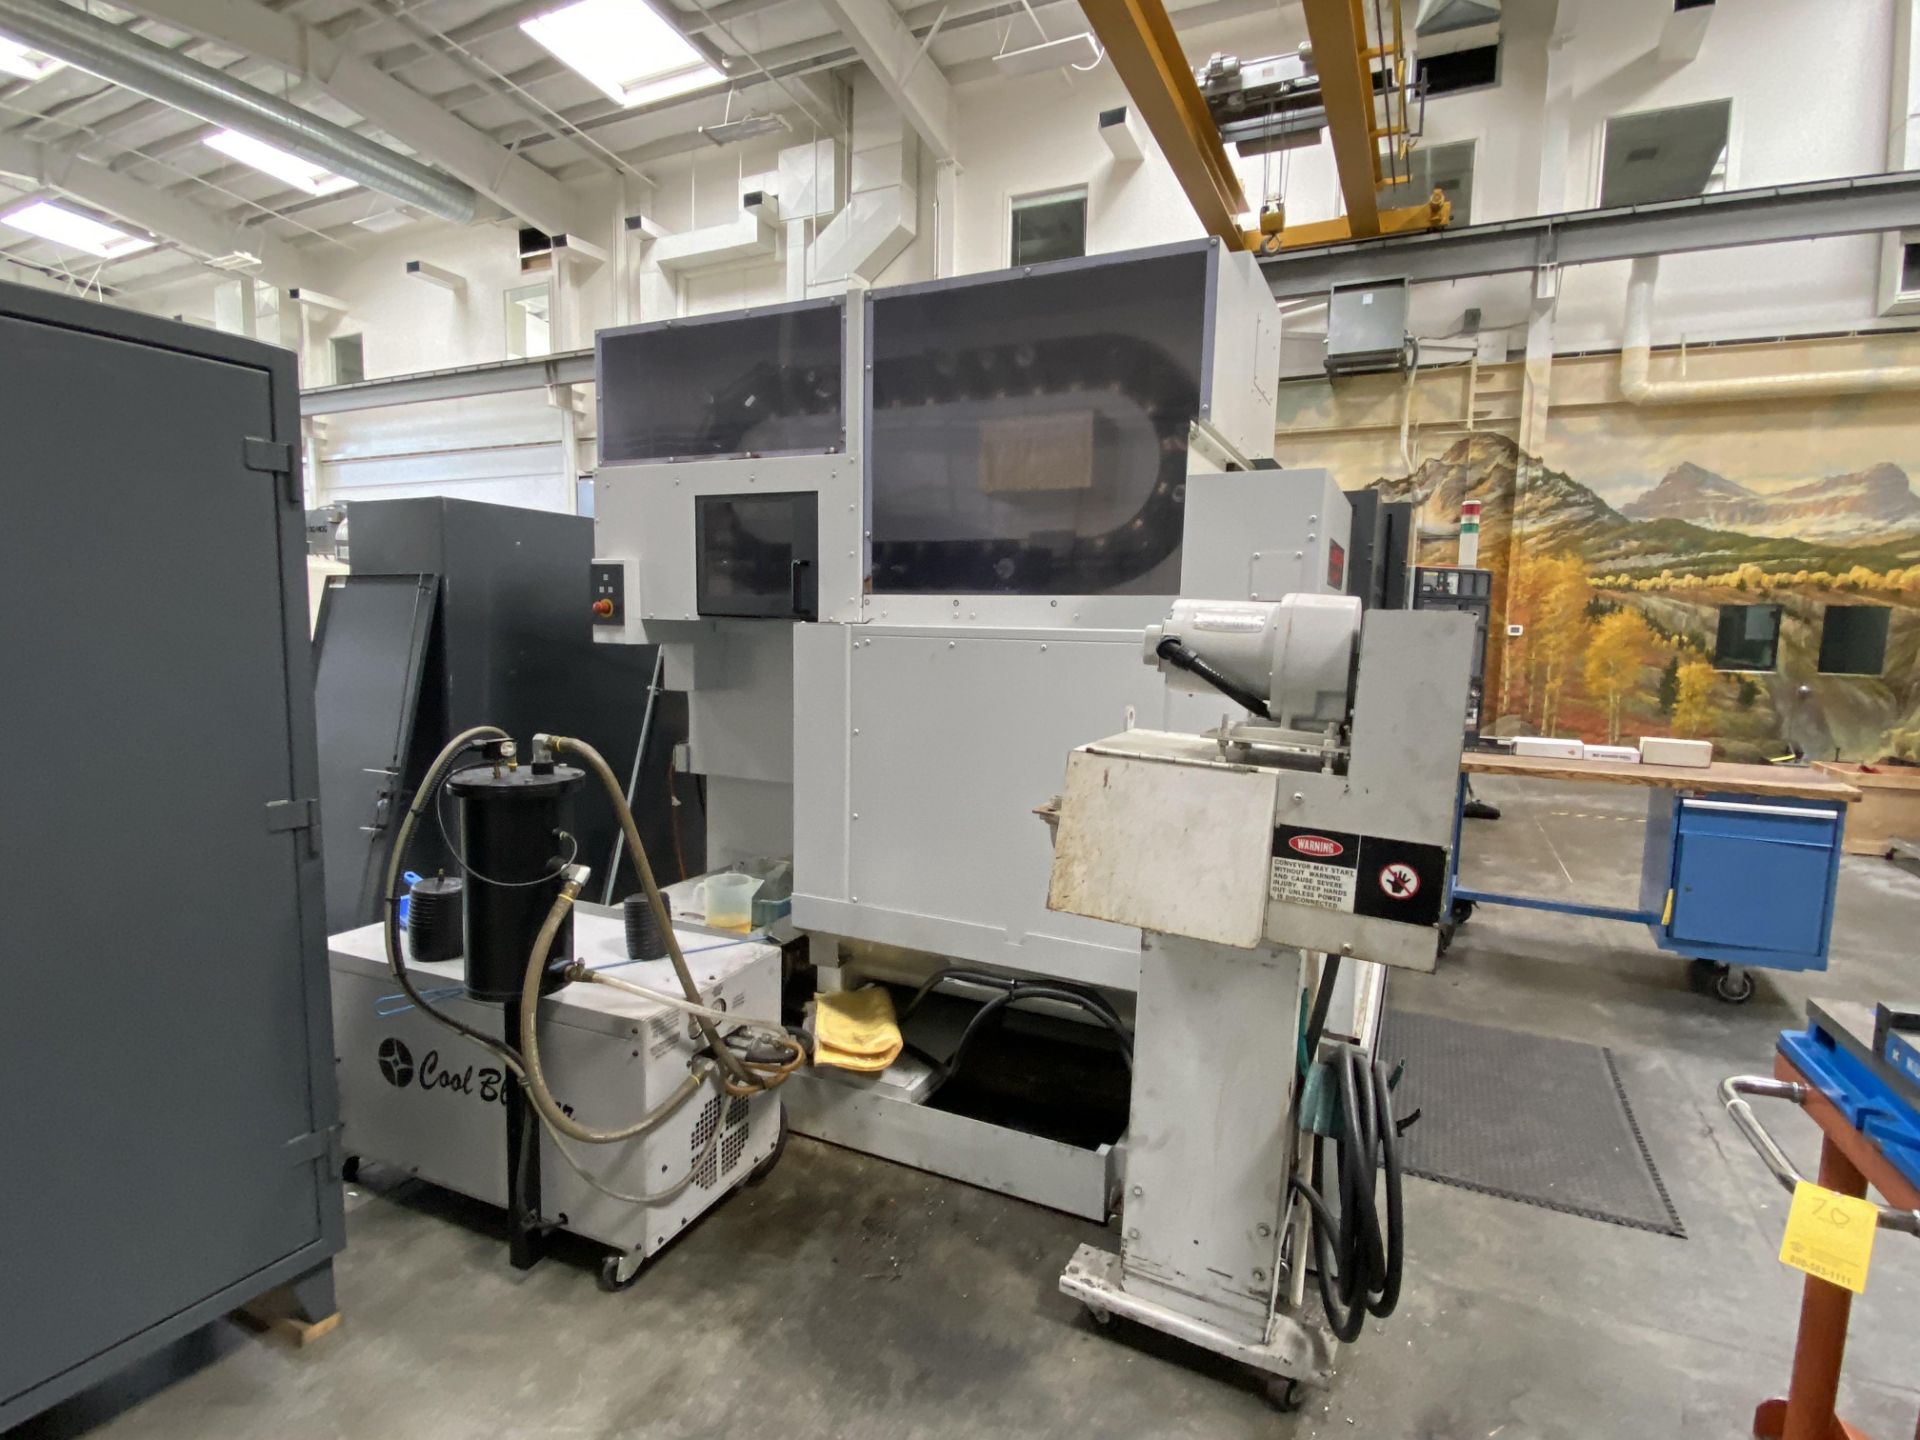 2005 Mori Seiki Vertical Machining Mill NV-5000A 1B/50 w/ 4th Axis (1940 Cutting Hours) - Image 7 of 9